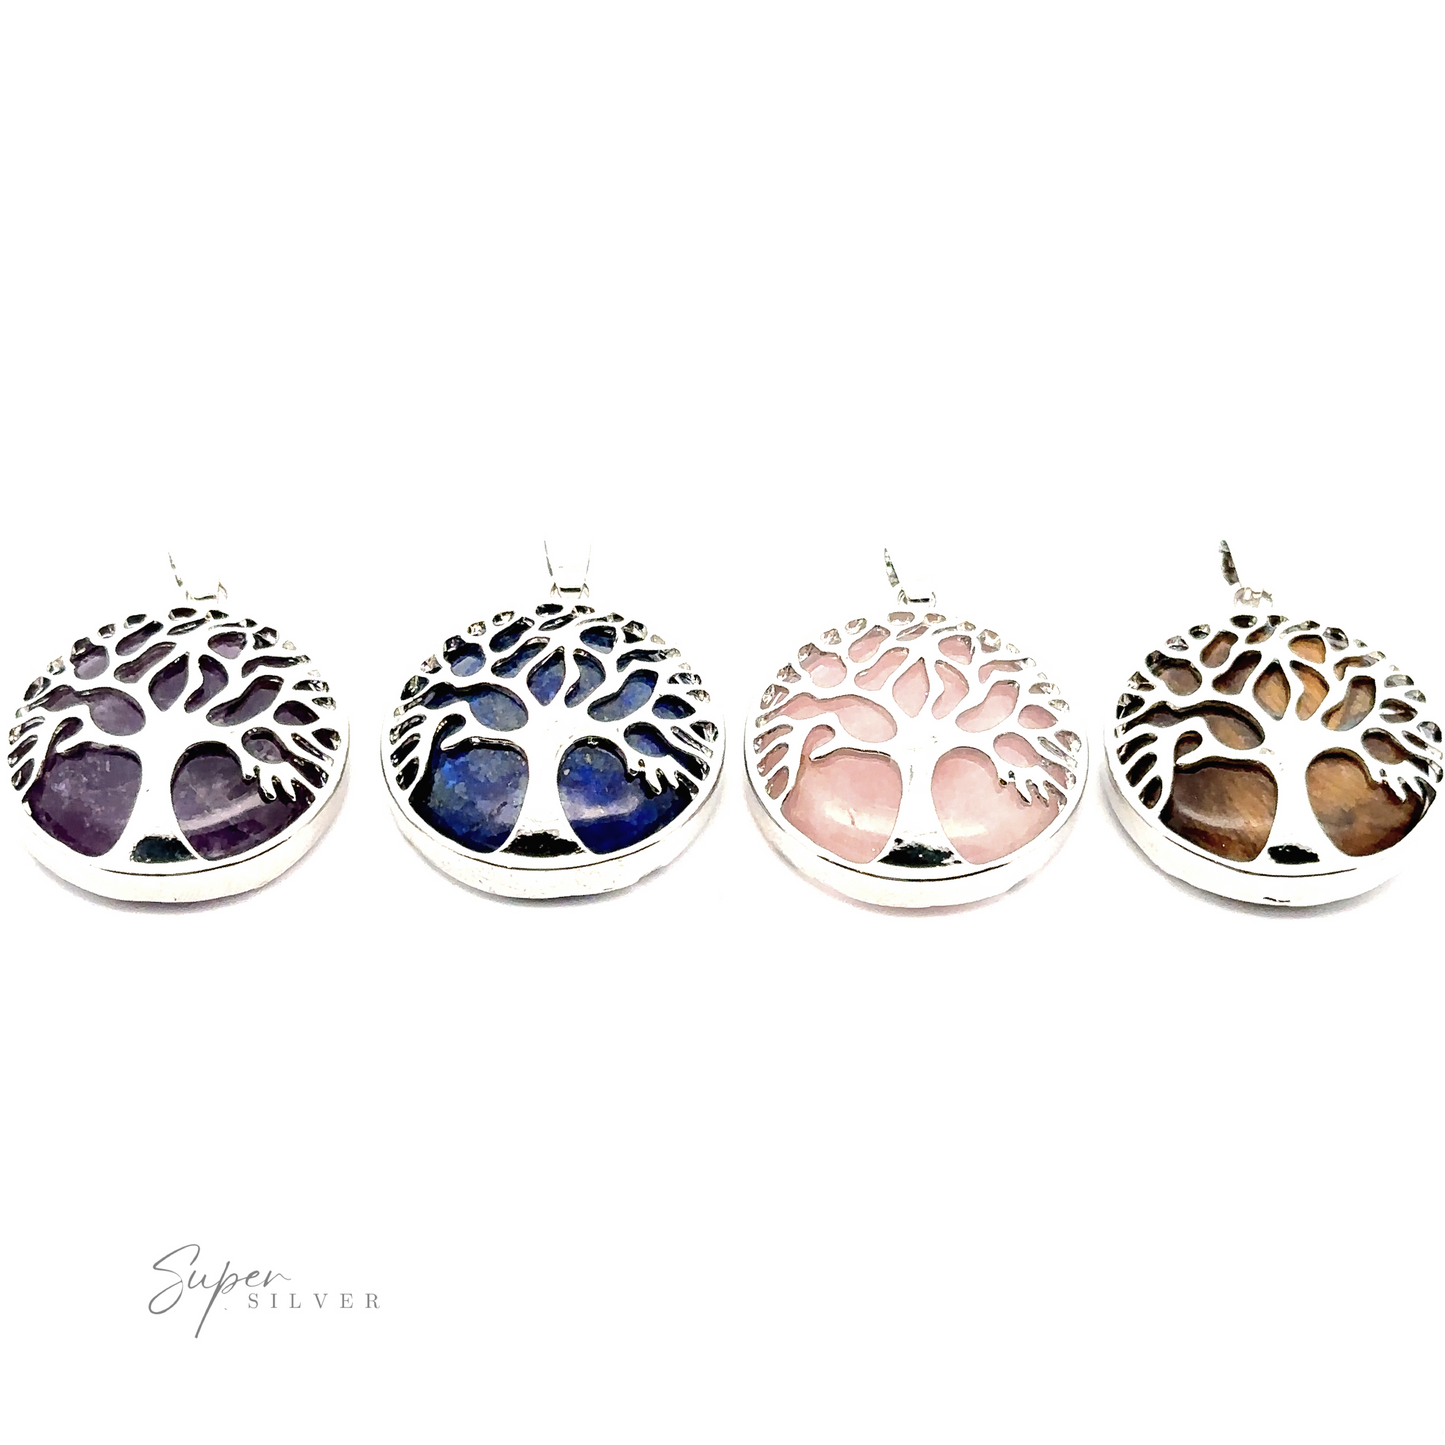 Four circular Tree of Life Pendants with gemstone backgrounds in purple, blue, pink, and brown, set in silver plated frames. The "Super Silver" logo is visible in the bottom left corner.